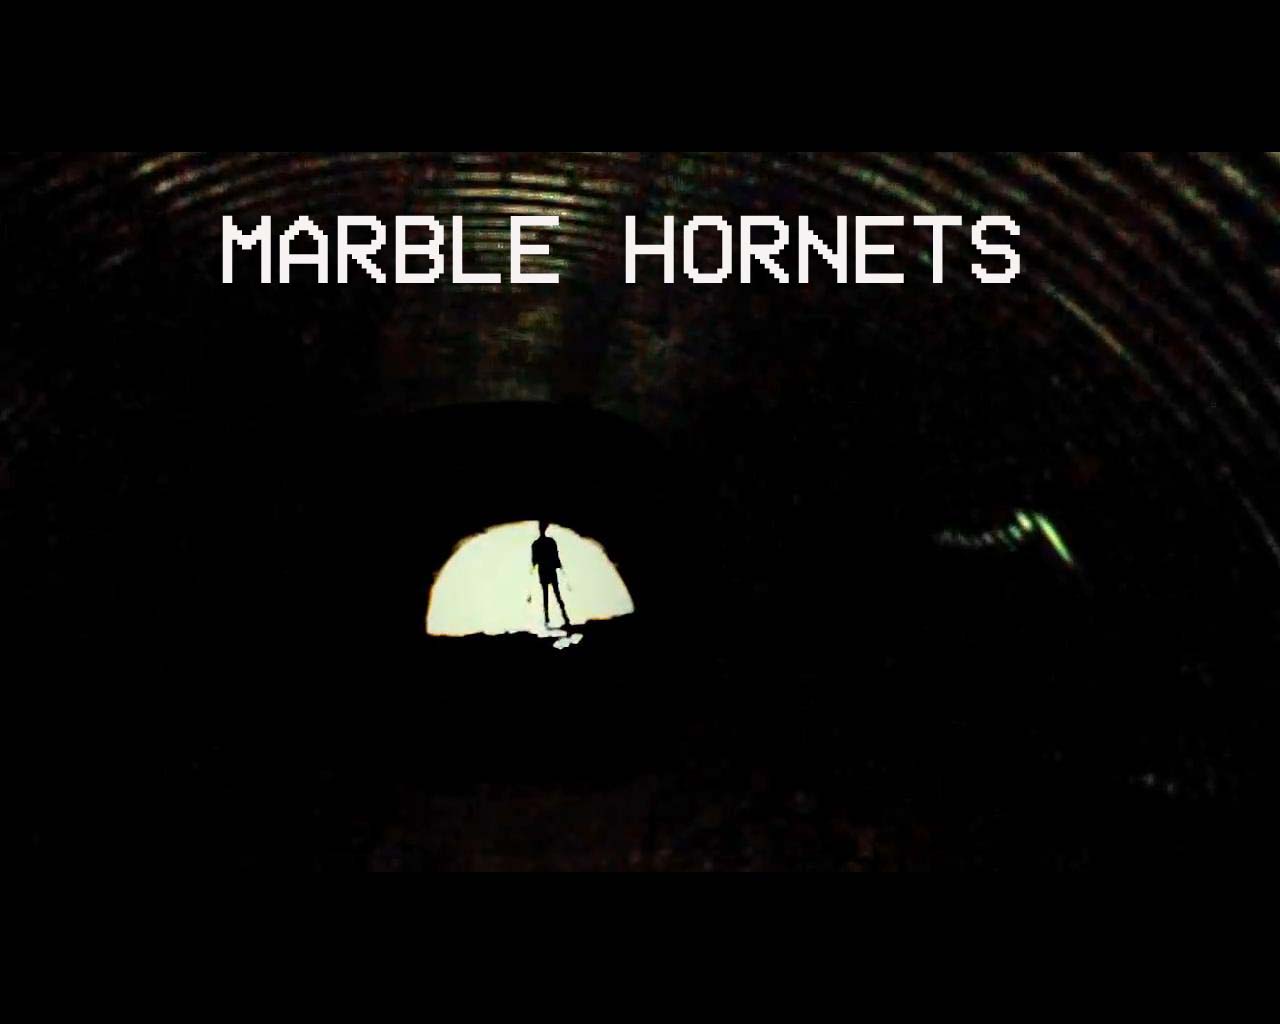 How is Marble Hornets connected to Slender Man?